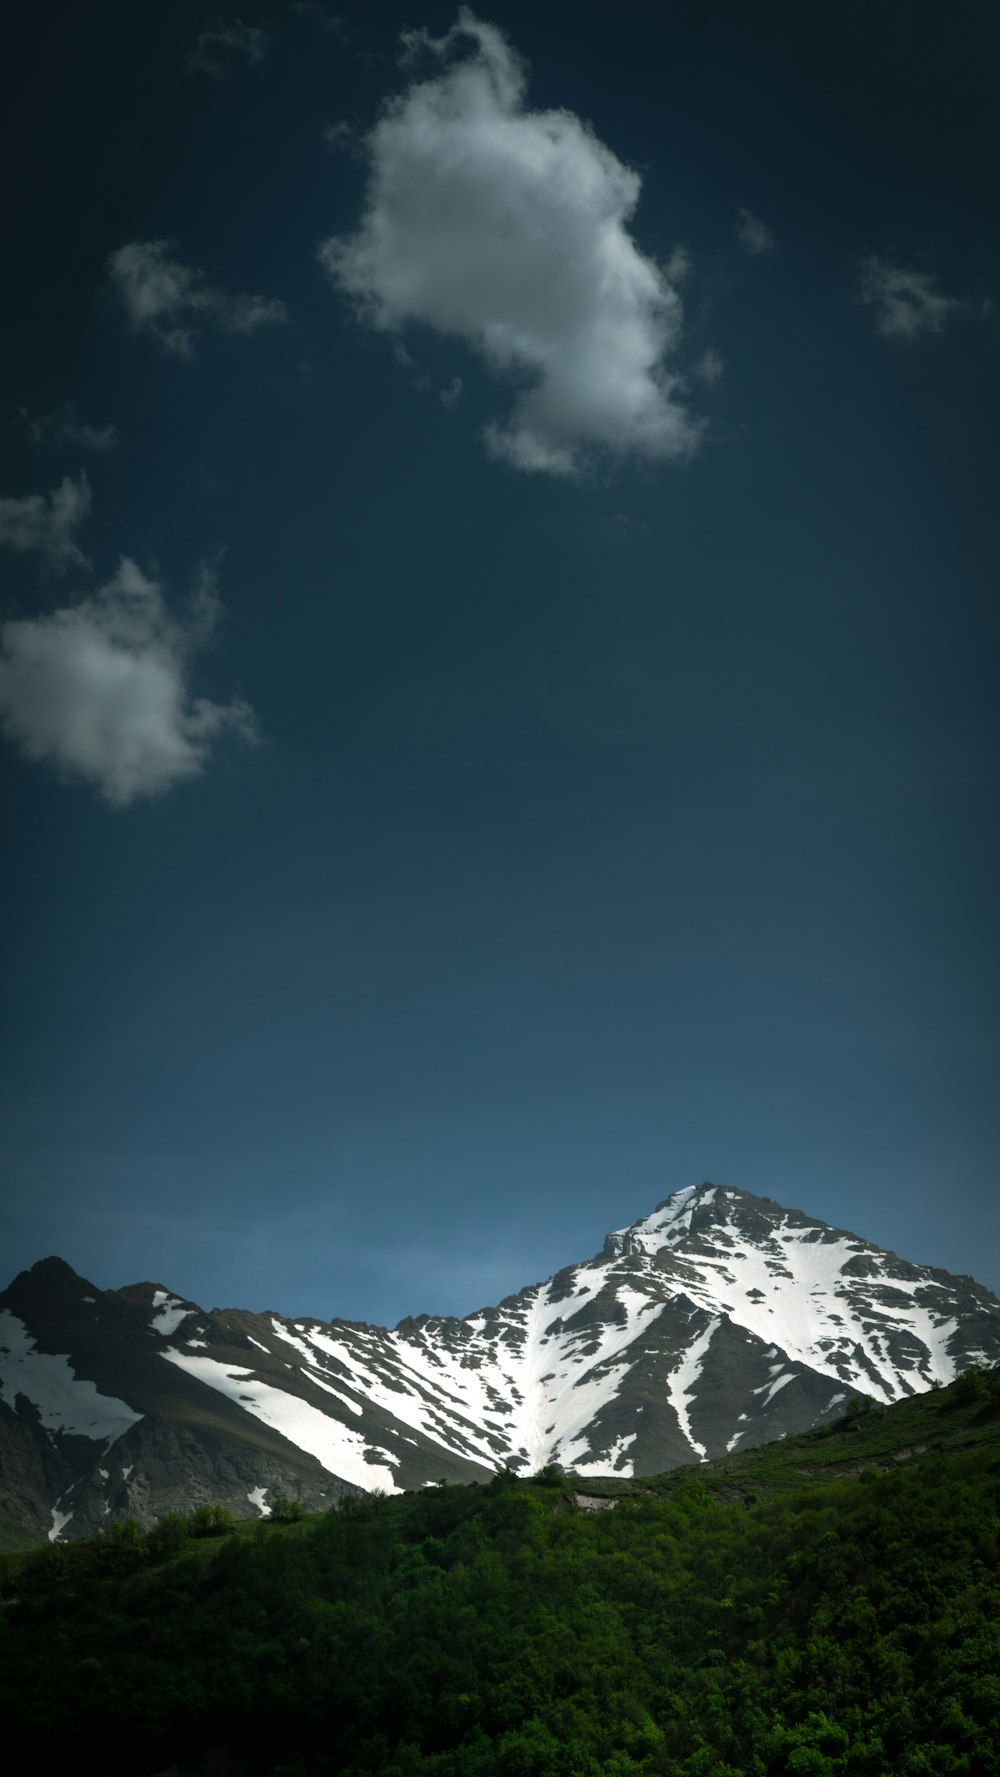 a snow covered mountain under a cloudy blue sky